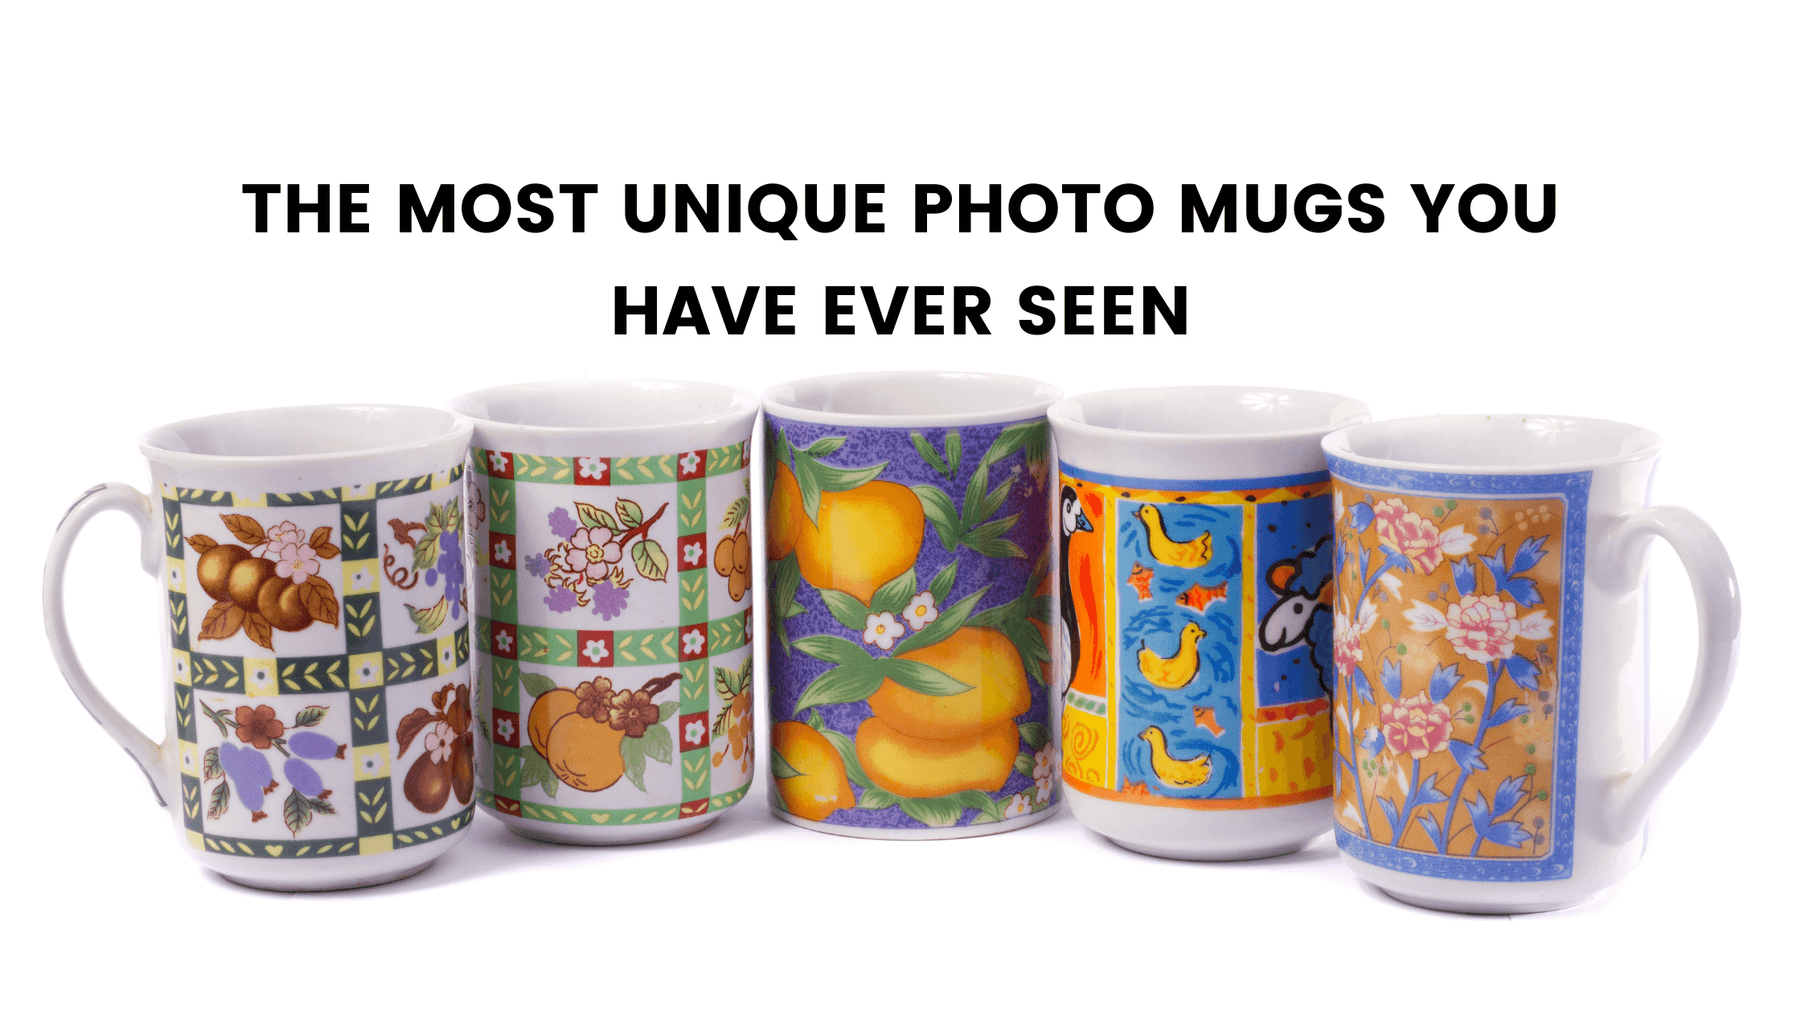 The Most Unique Photo Mugs You Have Ever Seen